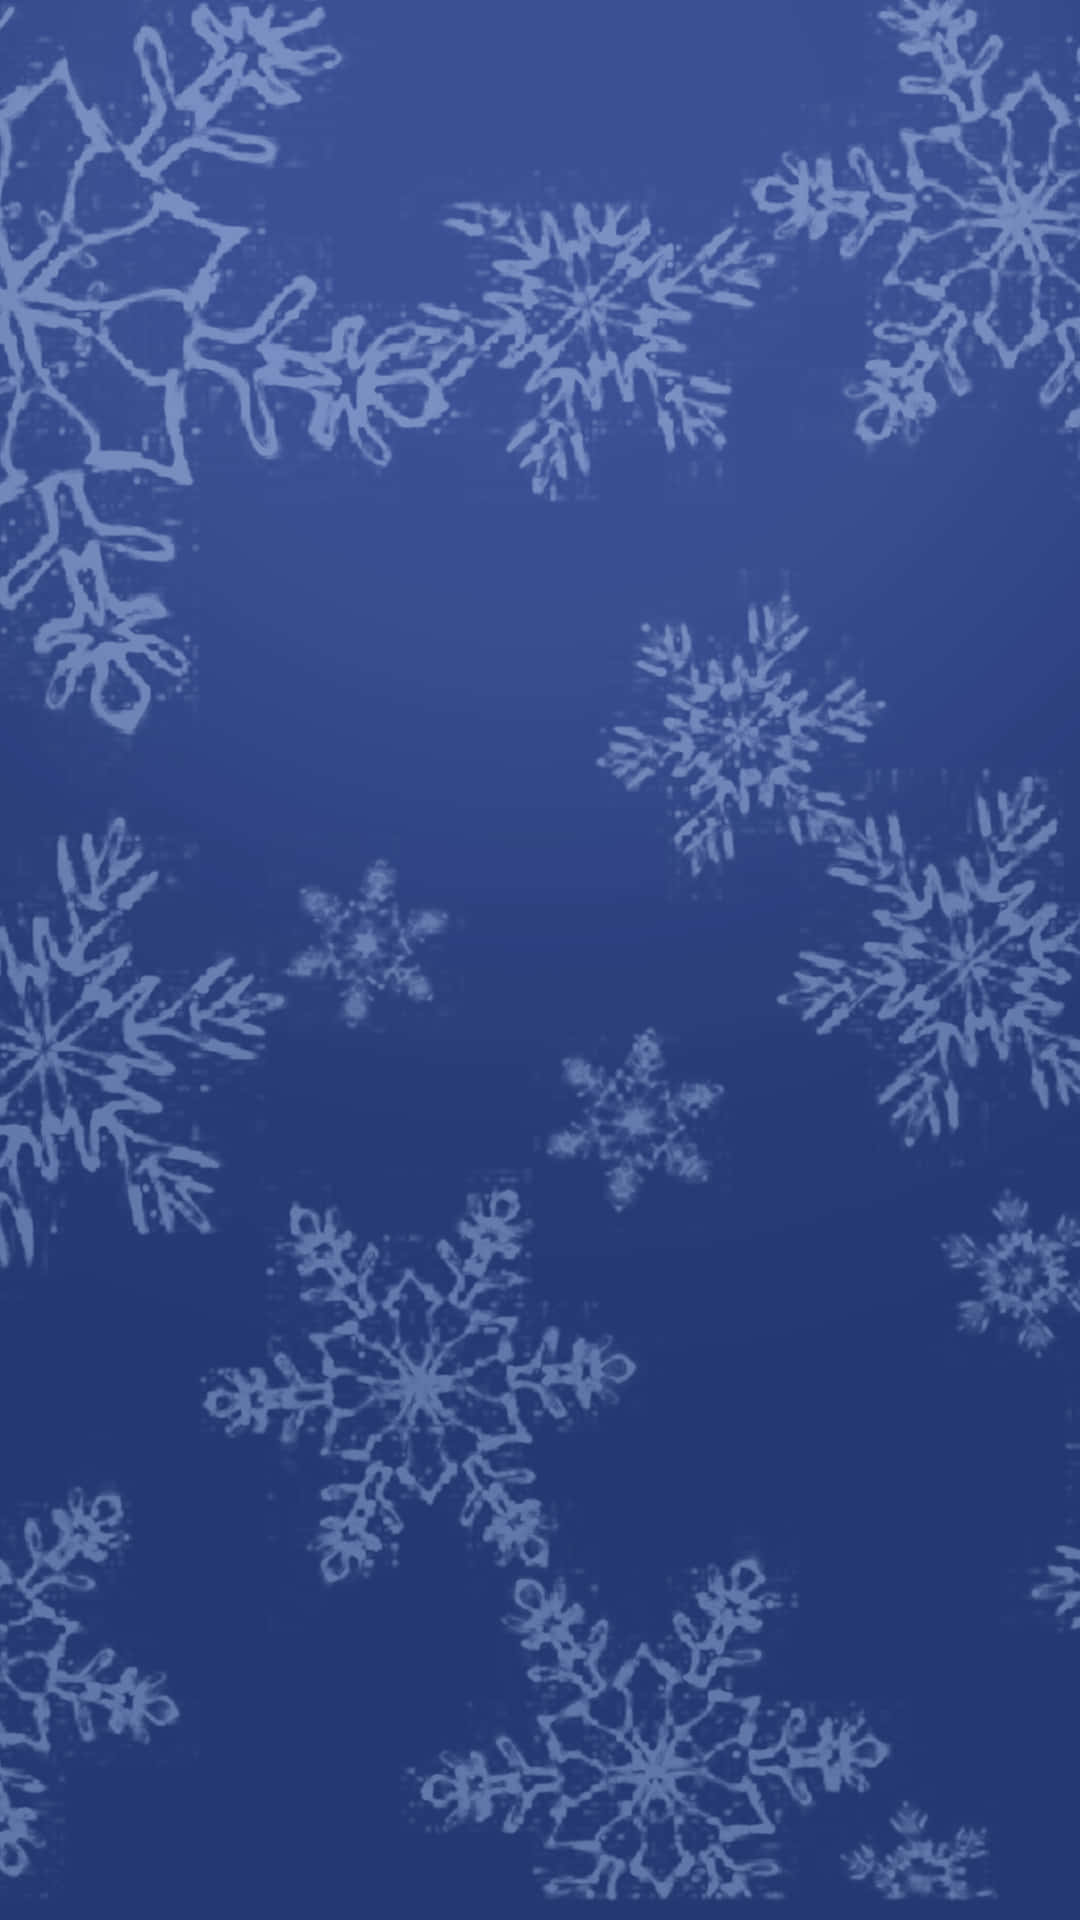 Festive Christmas Background With Ornaments And Snowflakes Background